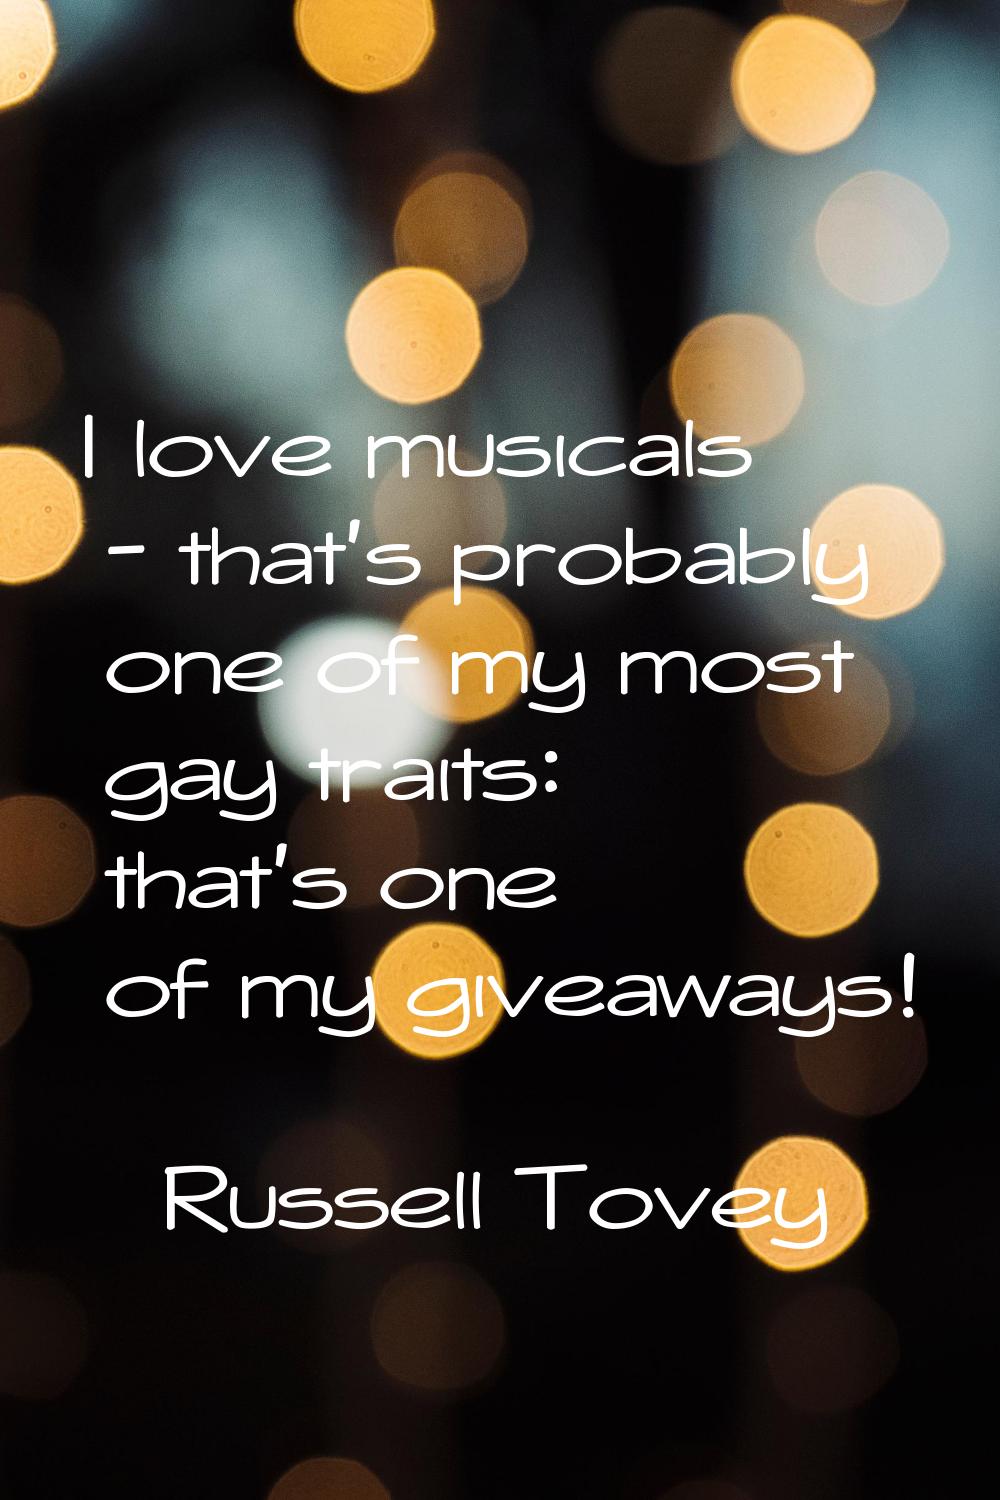 I love musicals - that's probably one of my most gay traits: that's one of my giveaways!